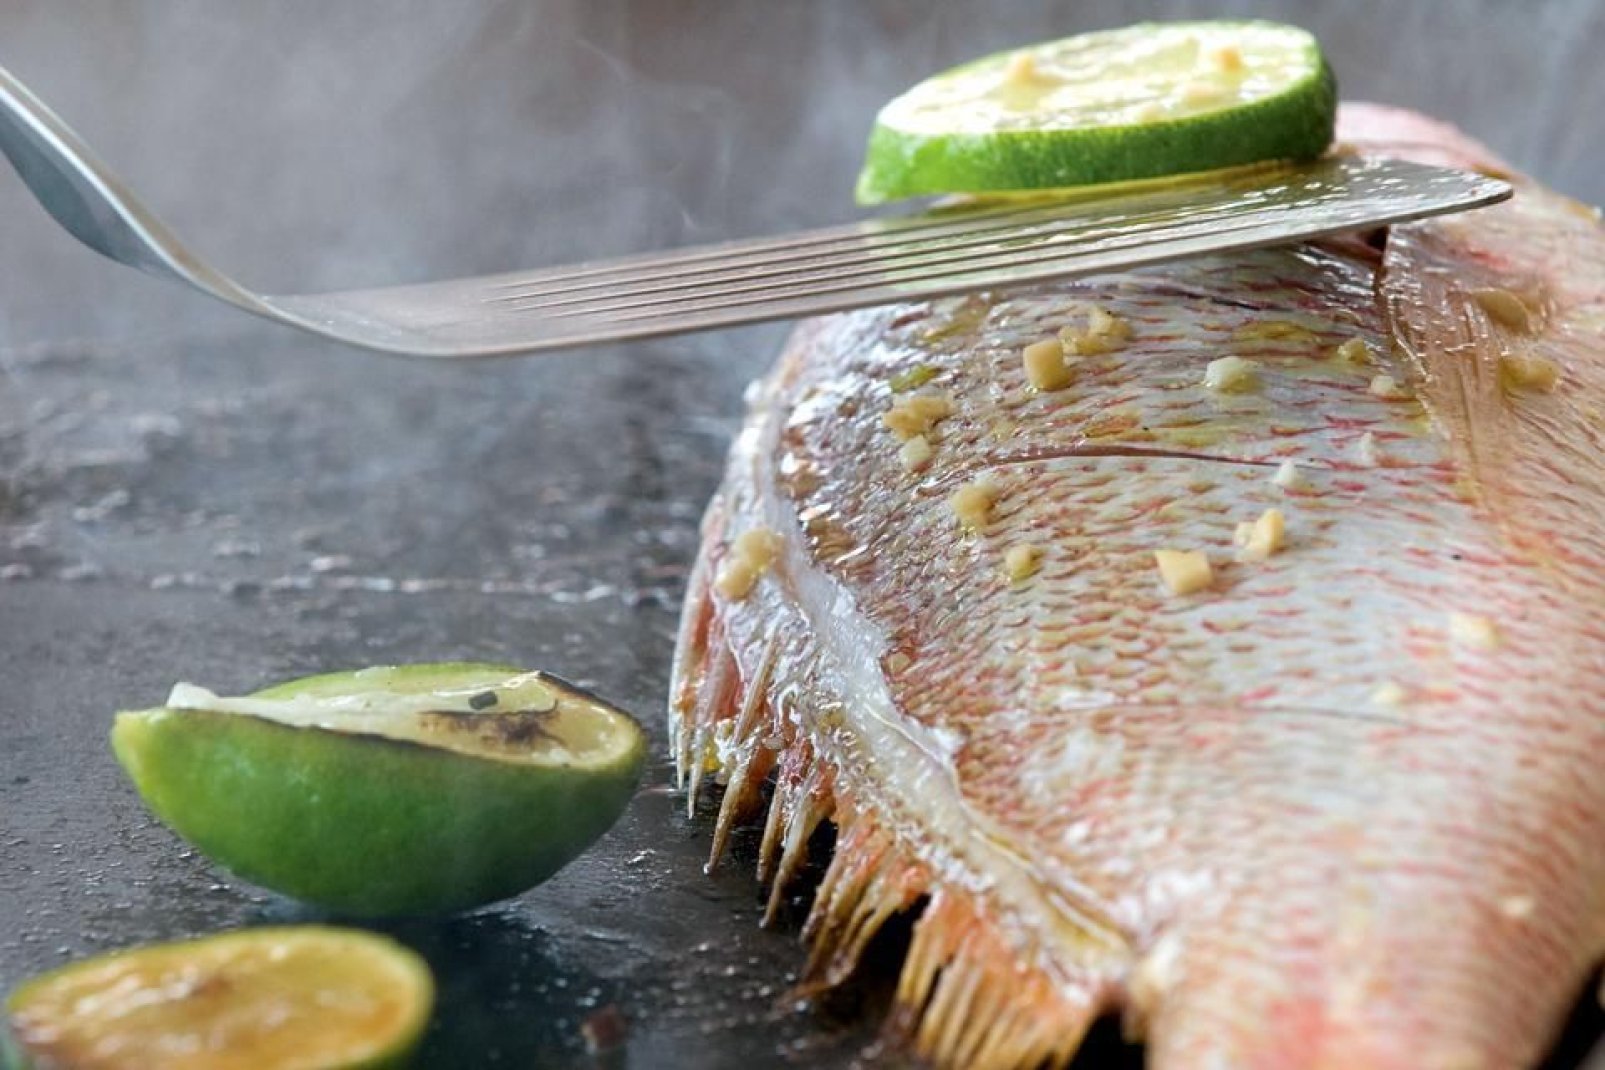 You will simply love the freshly-caught fish and shellfish grilled right in front of you.